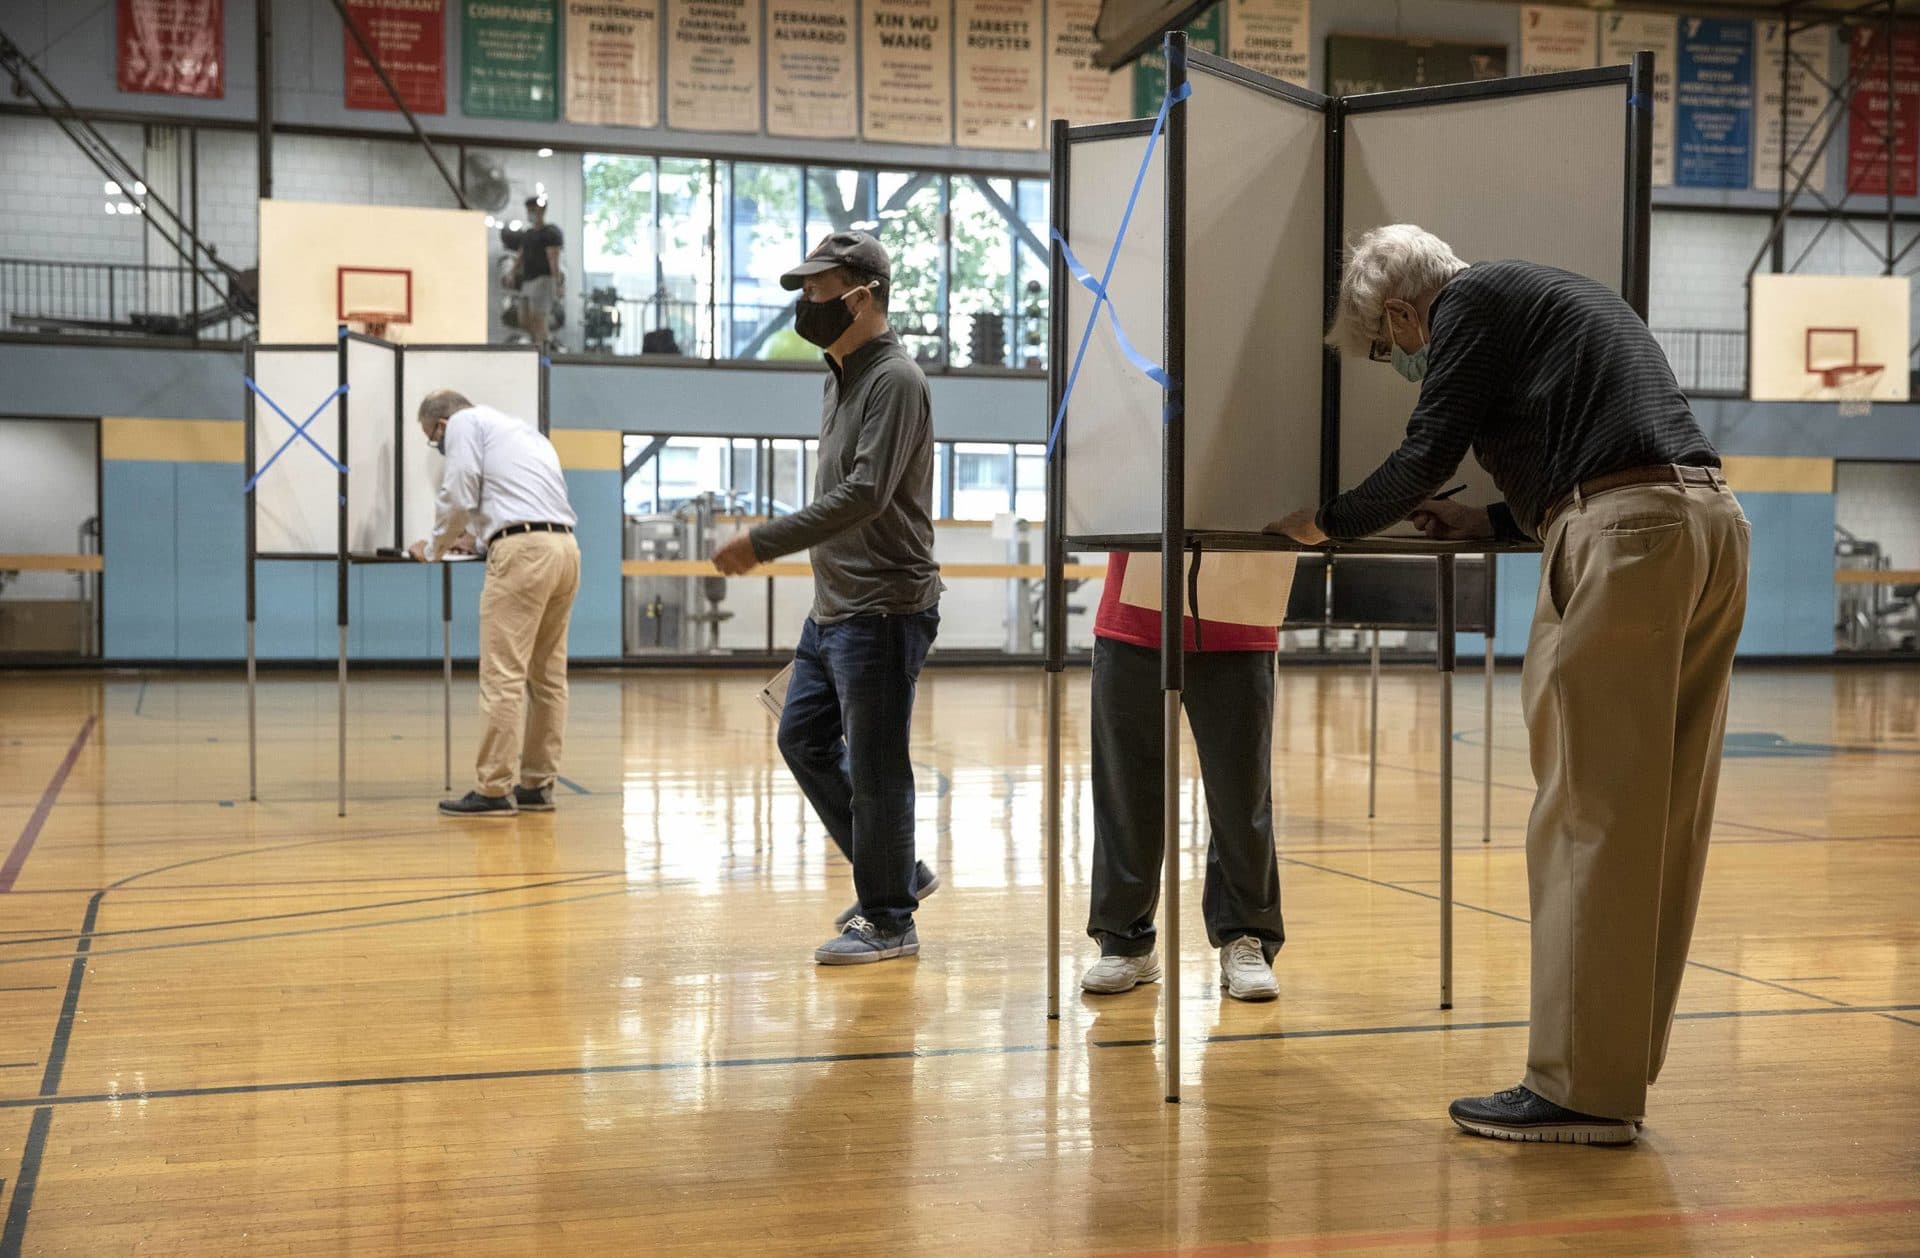 Voting gets underway at the Wang YMCA polling station in Boston. (Robin Lubbock/WBUR)